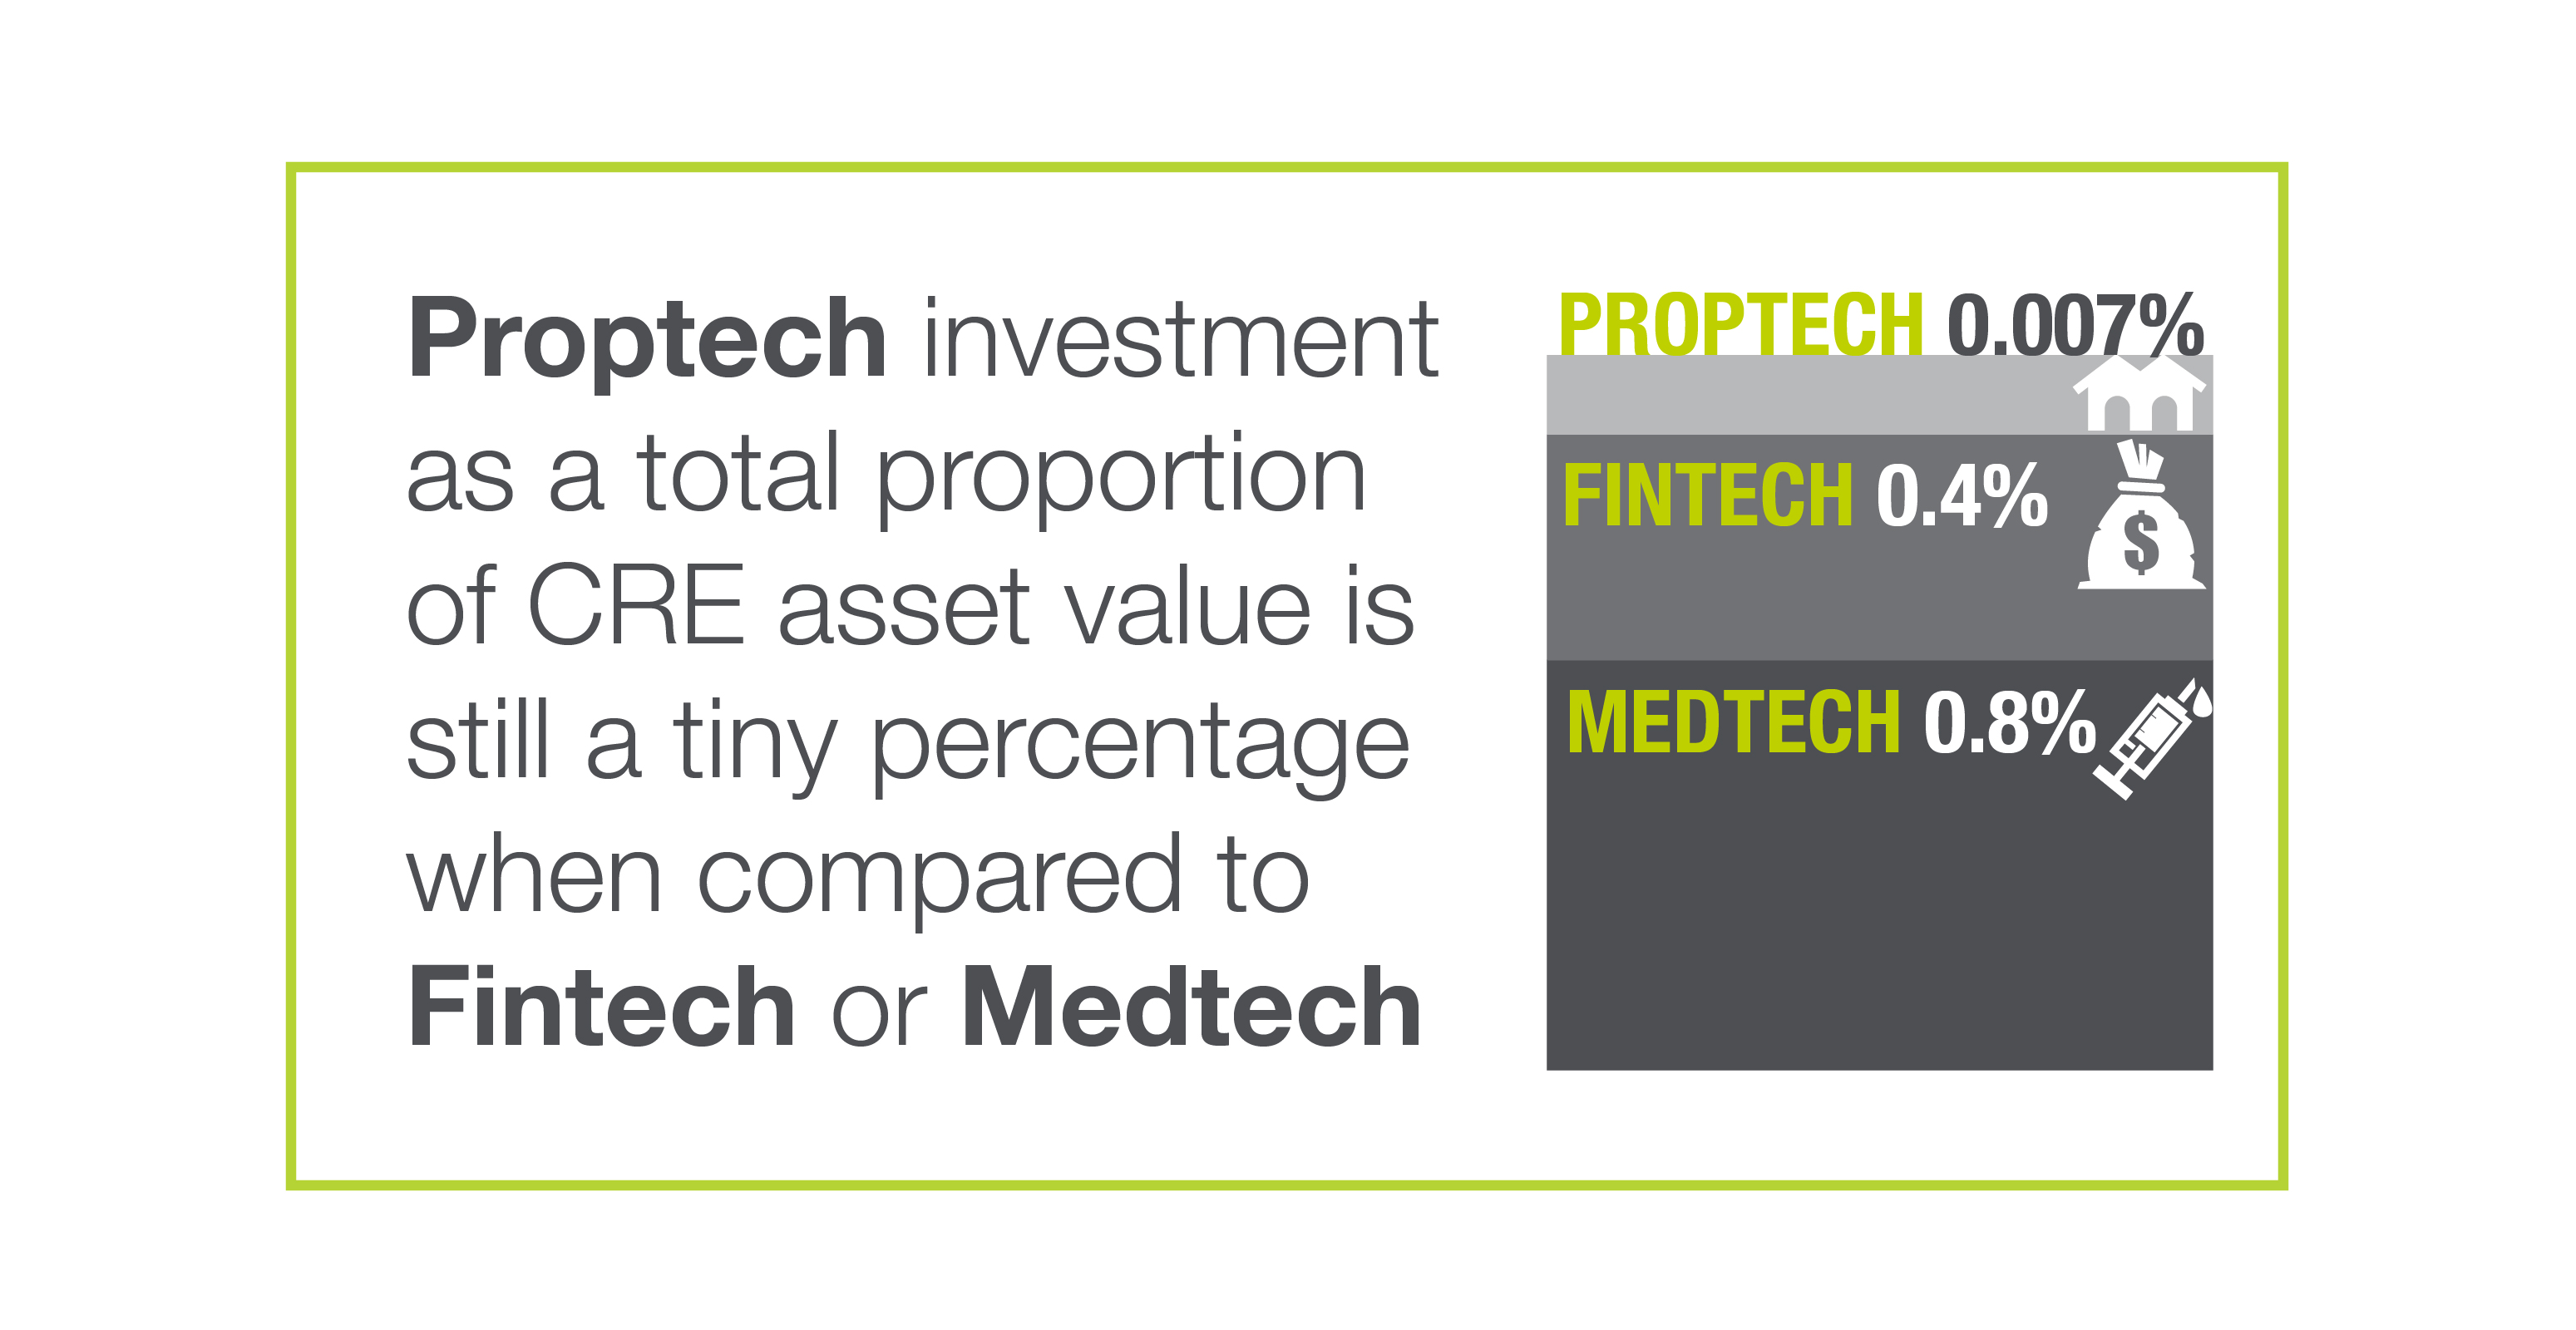 proptech investment compared to fintech and medtech